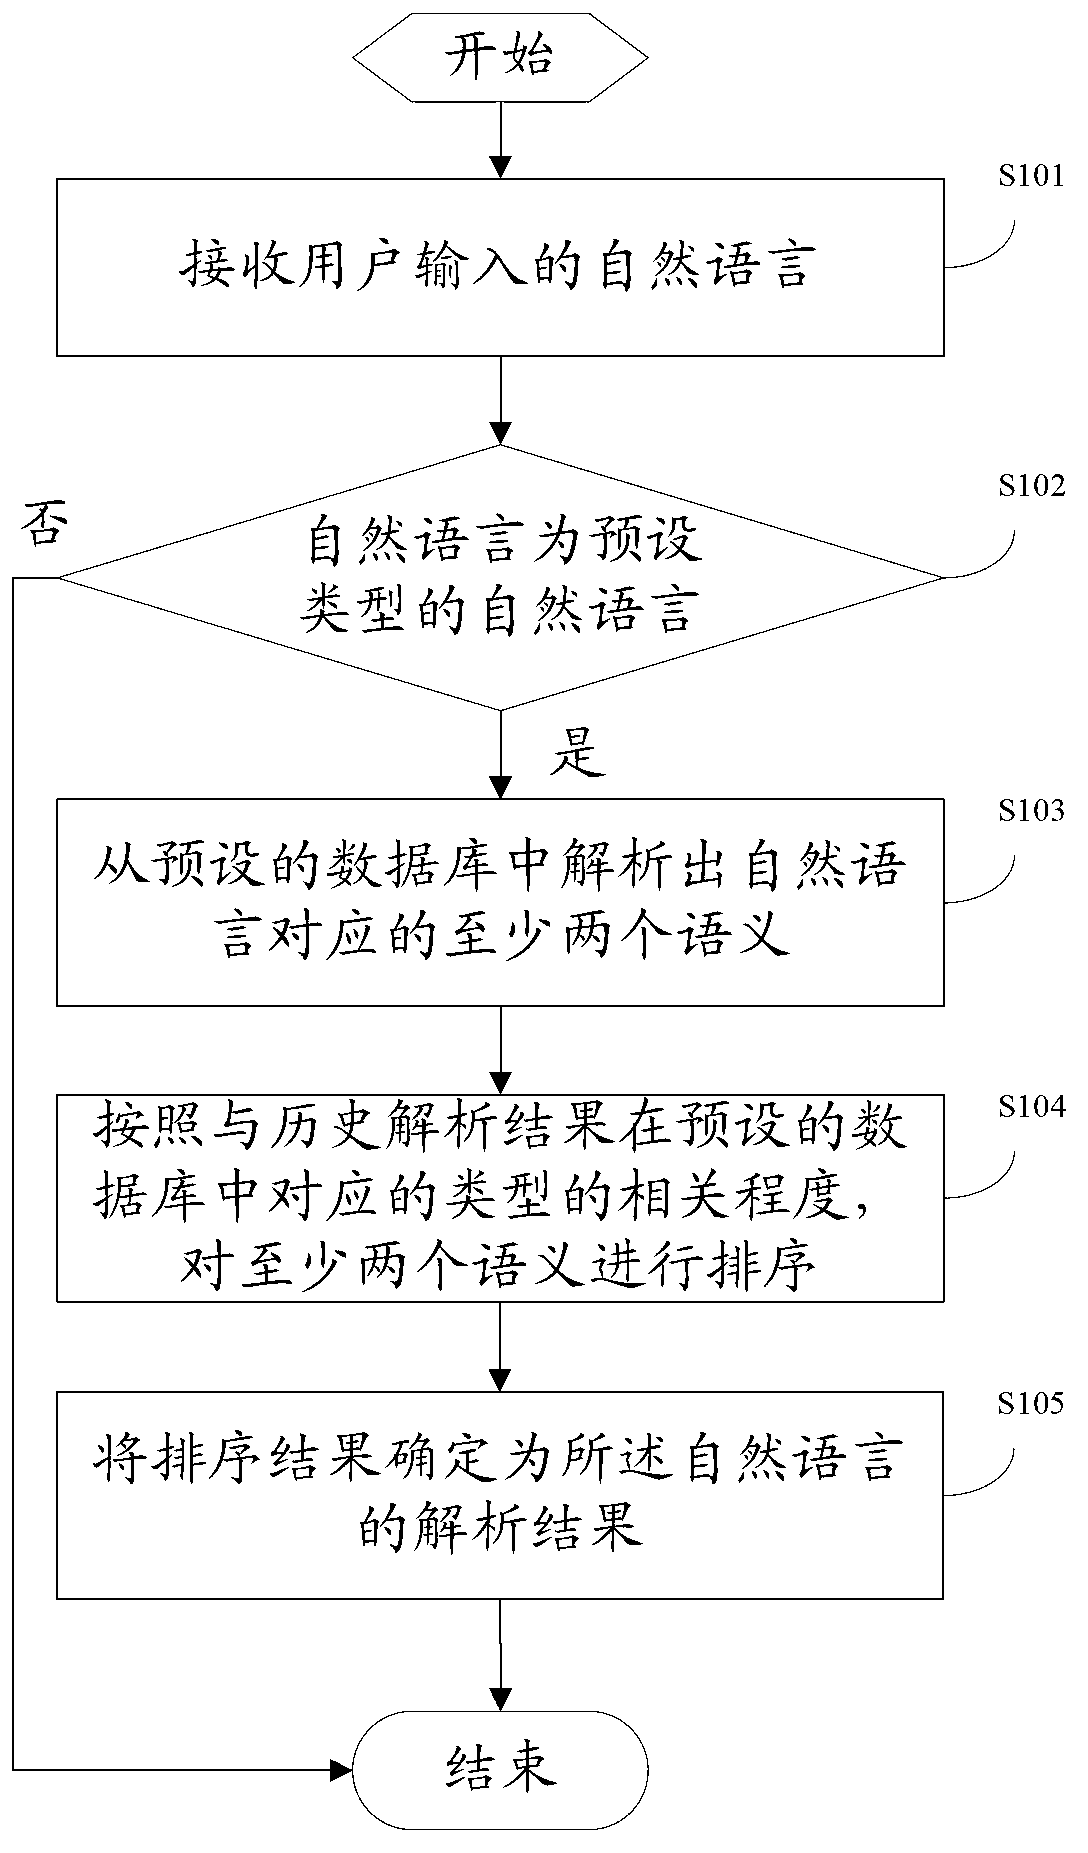 Method and device for semantic analysis of natural language